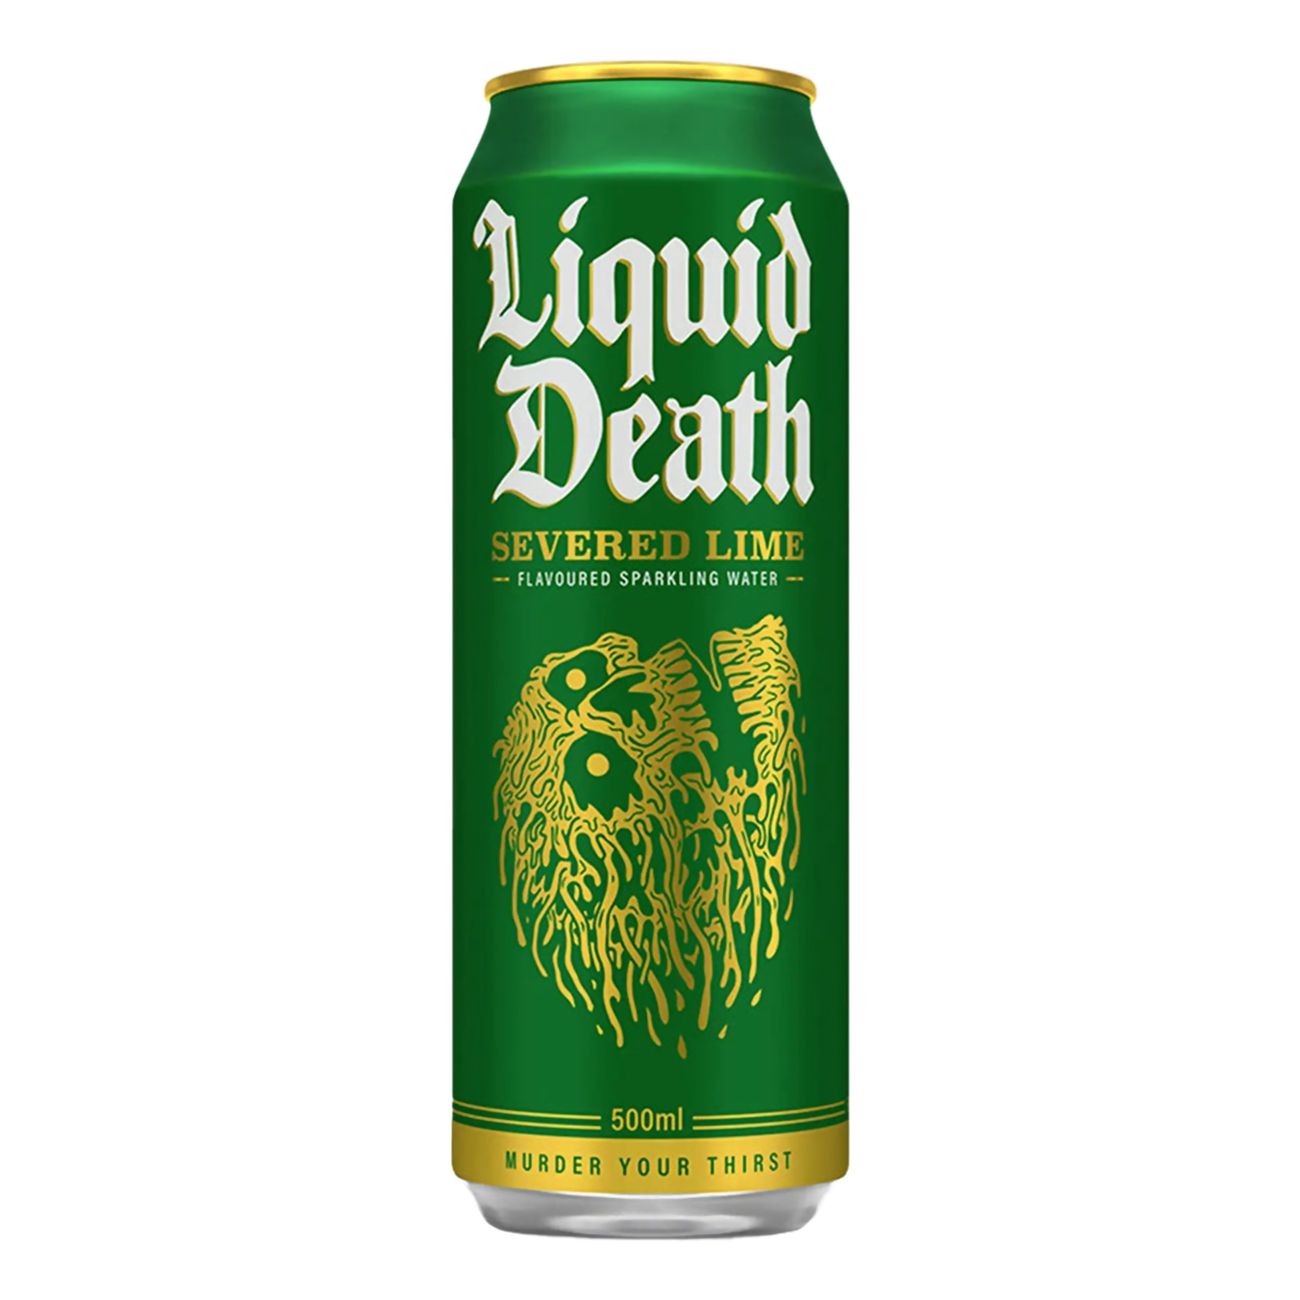 liquid-death-sparkling-water-severed-lime-500ml-96849-1